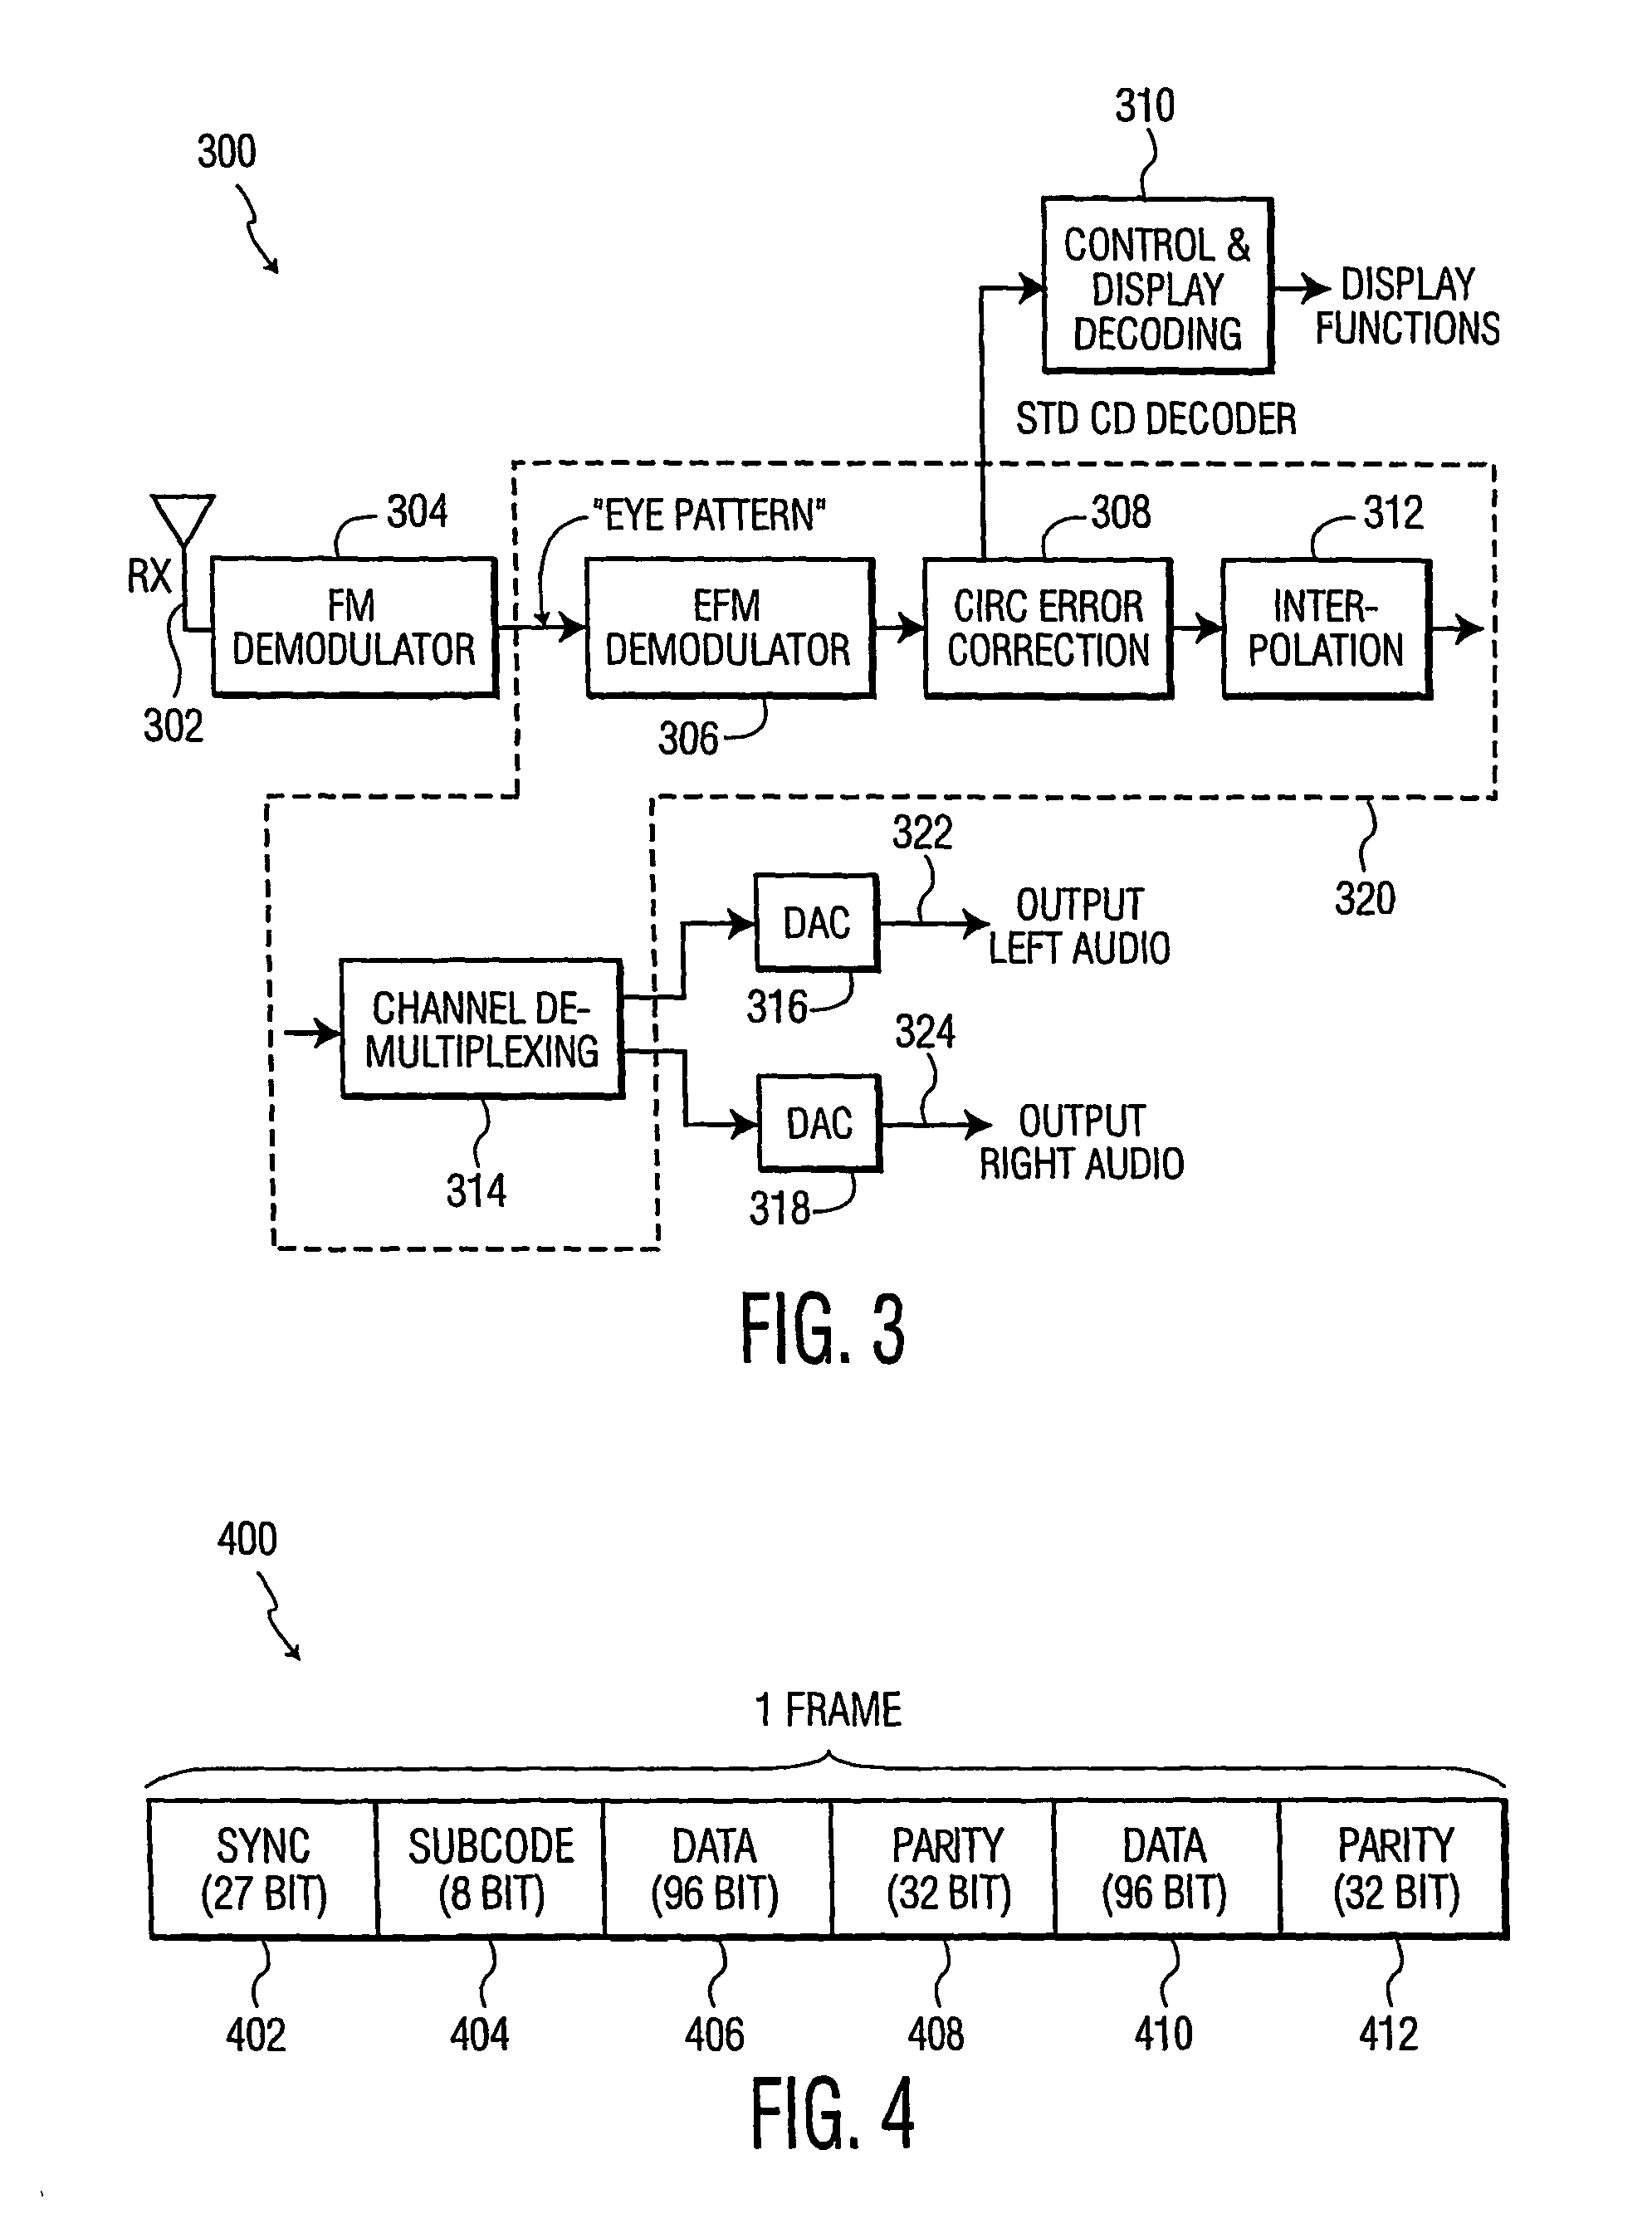 Method and apparatus for transmitting audio and non-audio information with error correction